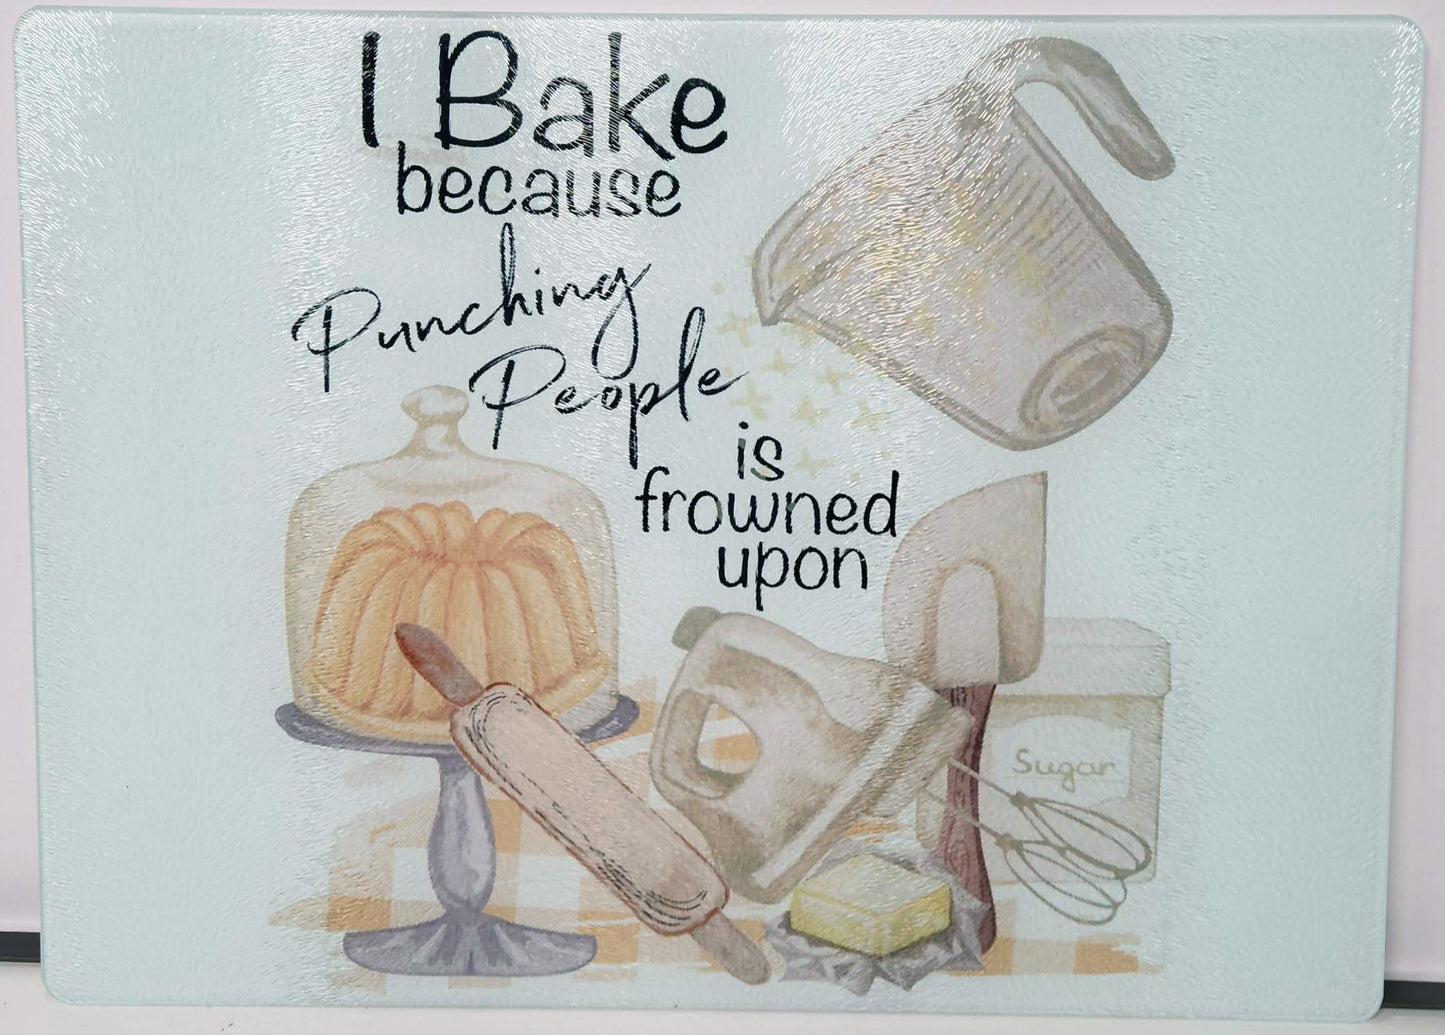 I Bake Because Punching People is Frowned Upon Glass Cutting Board